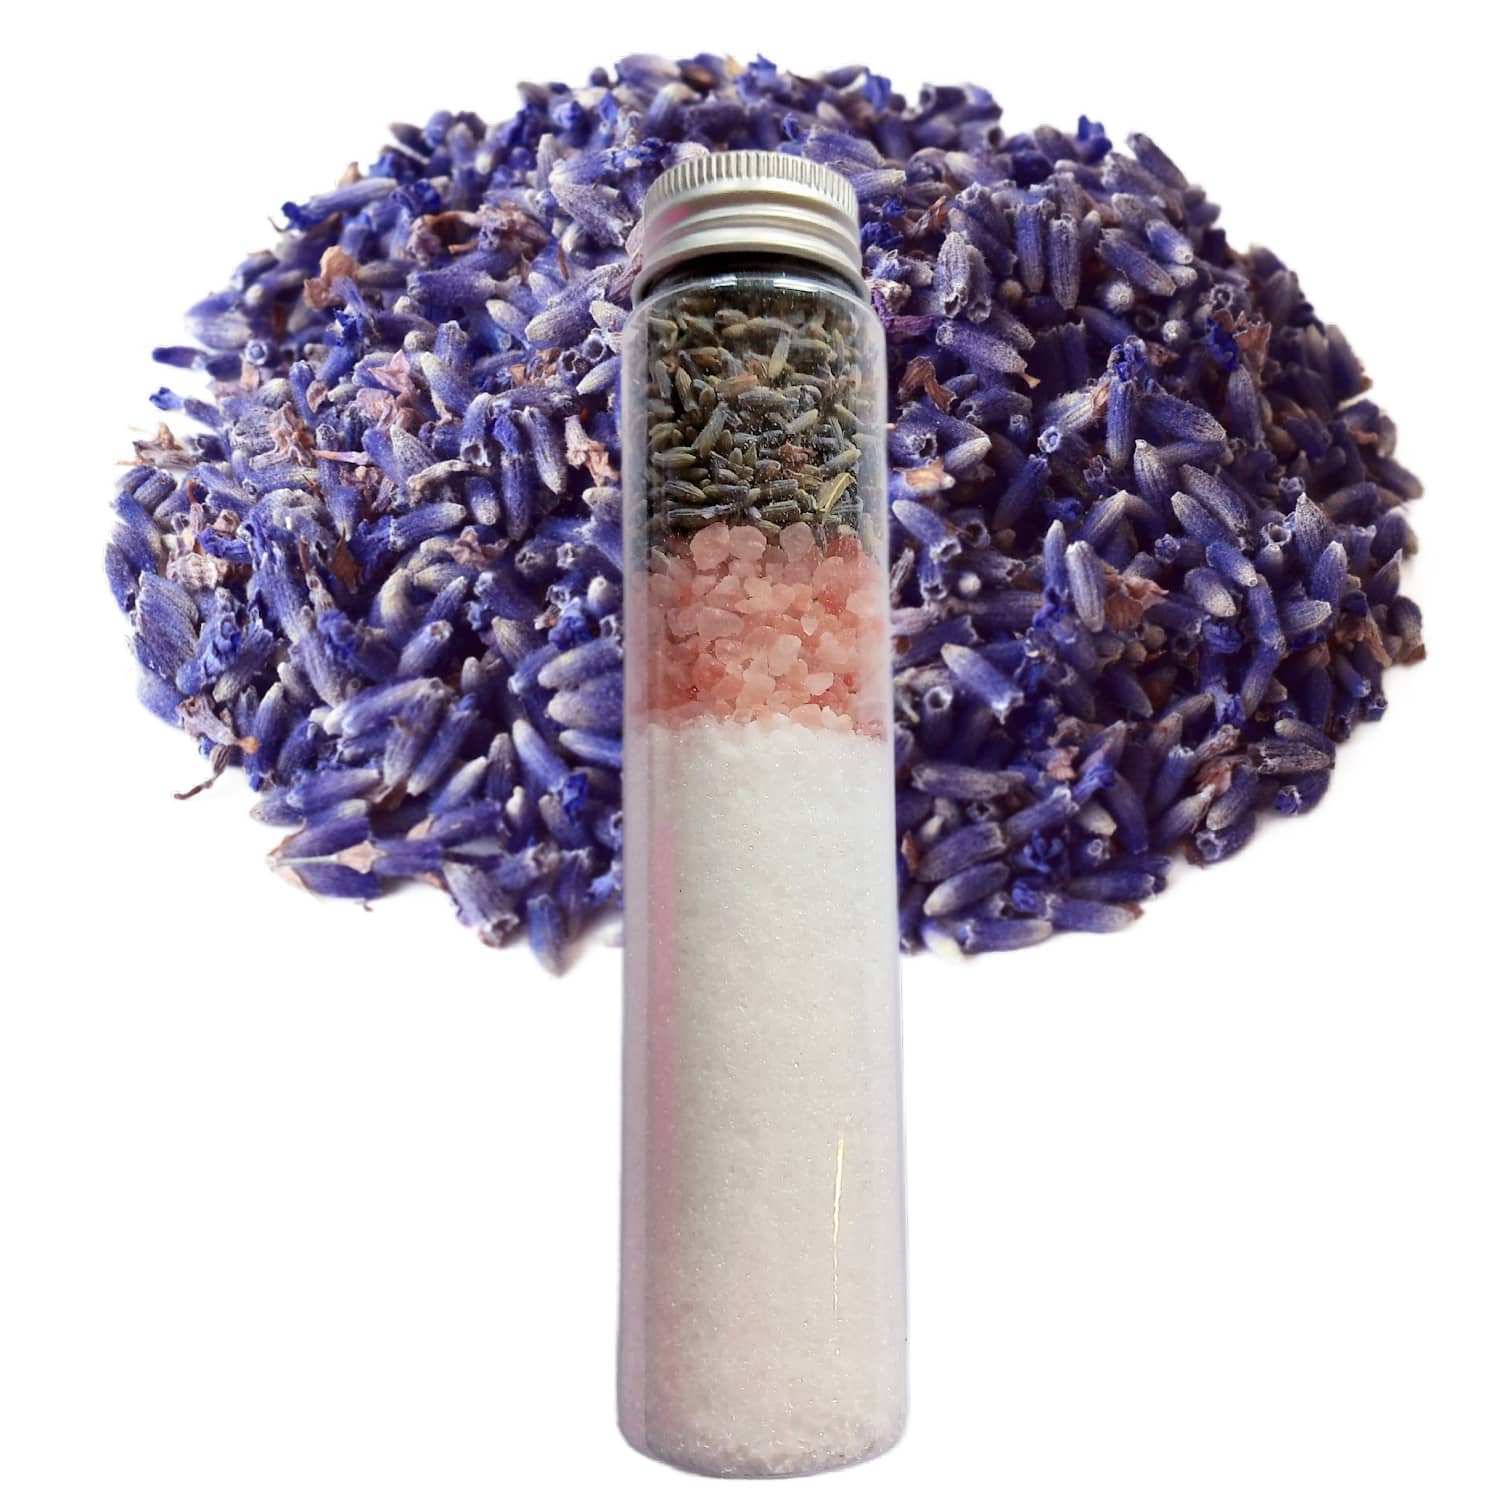 Enhance your bath ritual with the soothing scent of Hidcote lavender from our English botanical bath salt tube. Shop now!